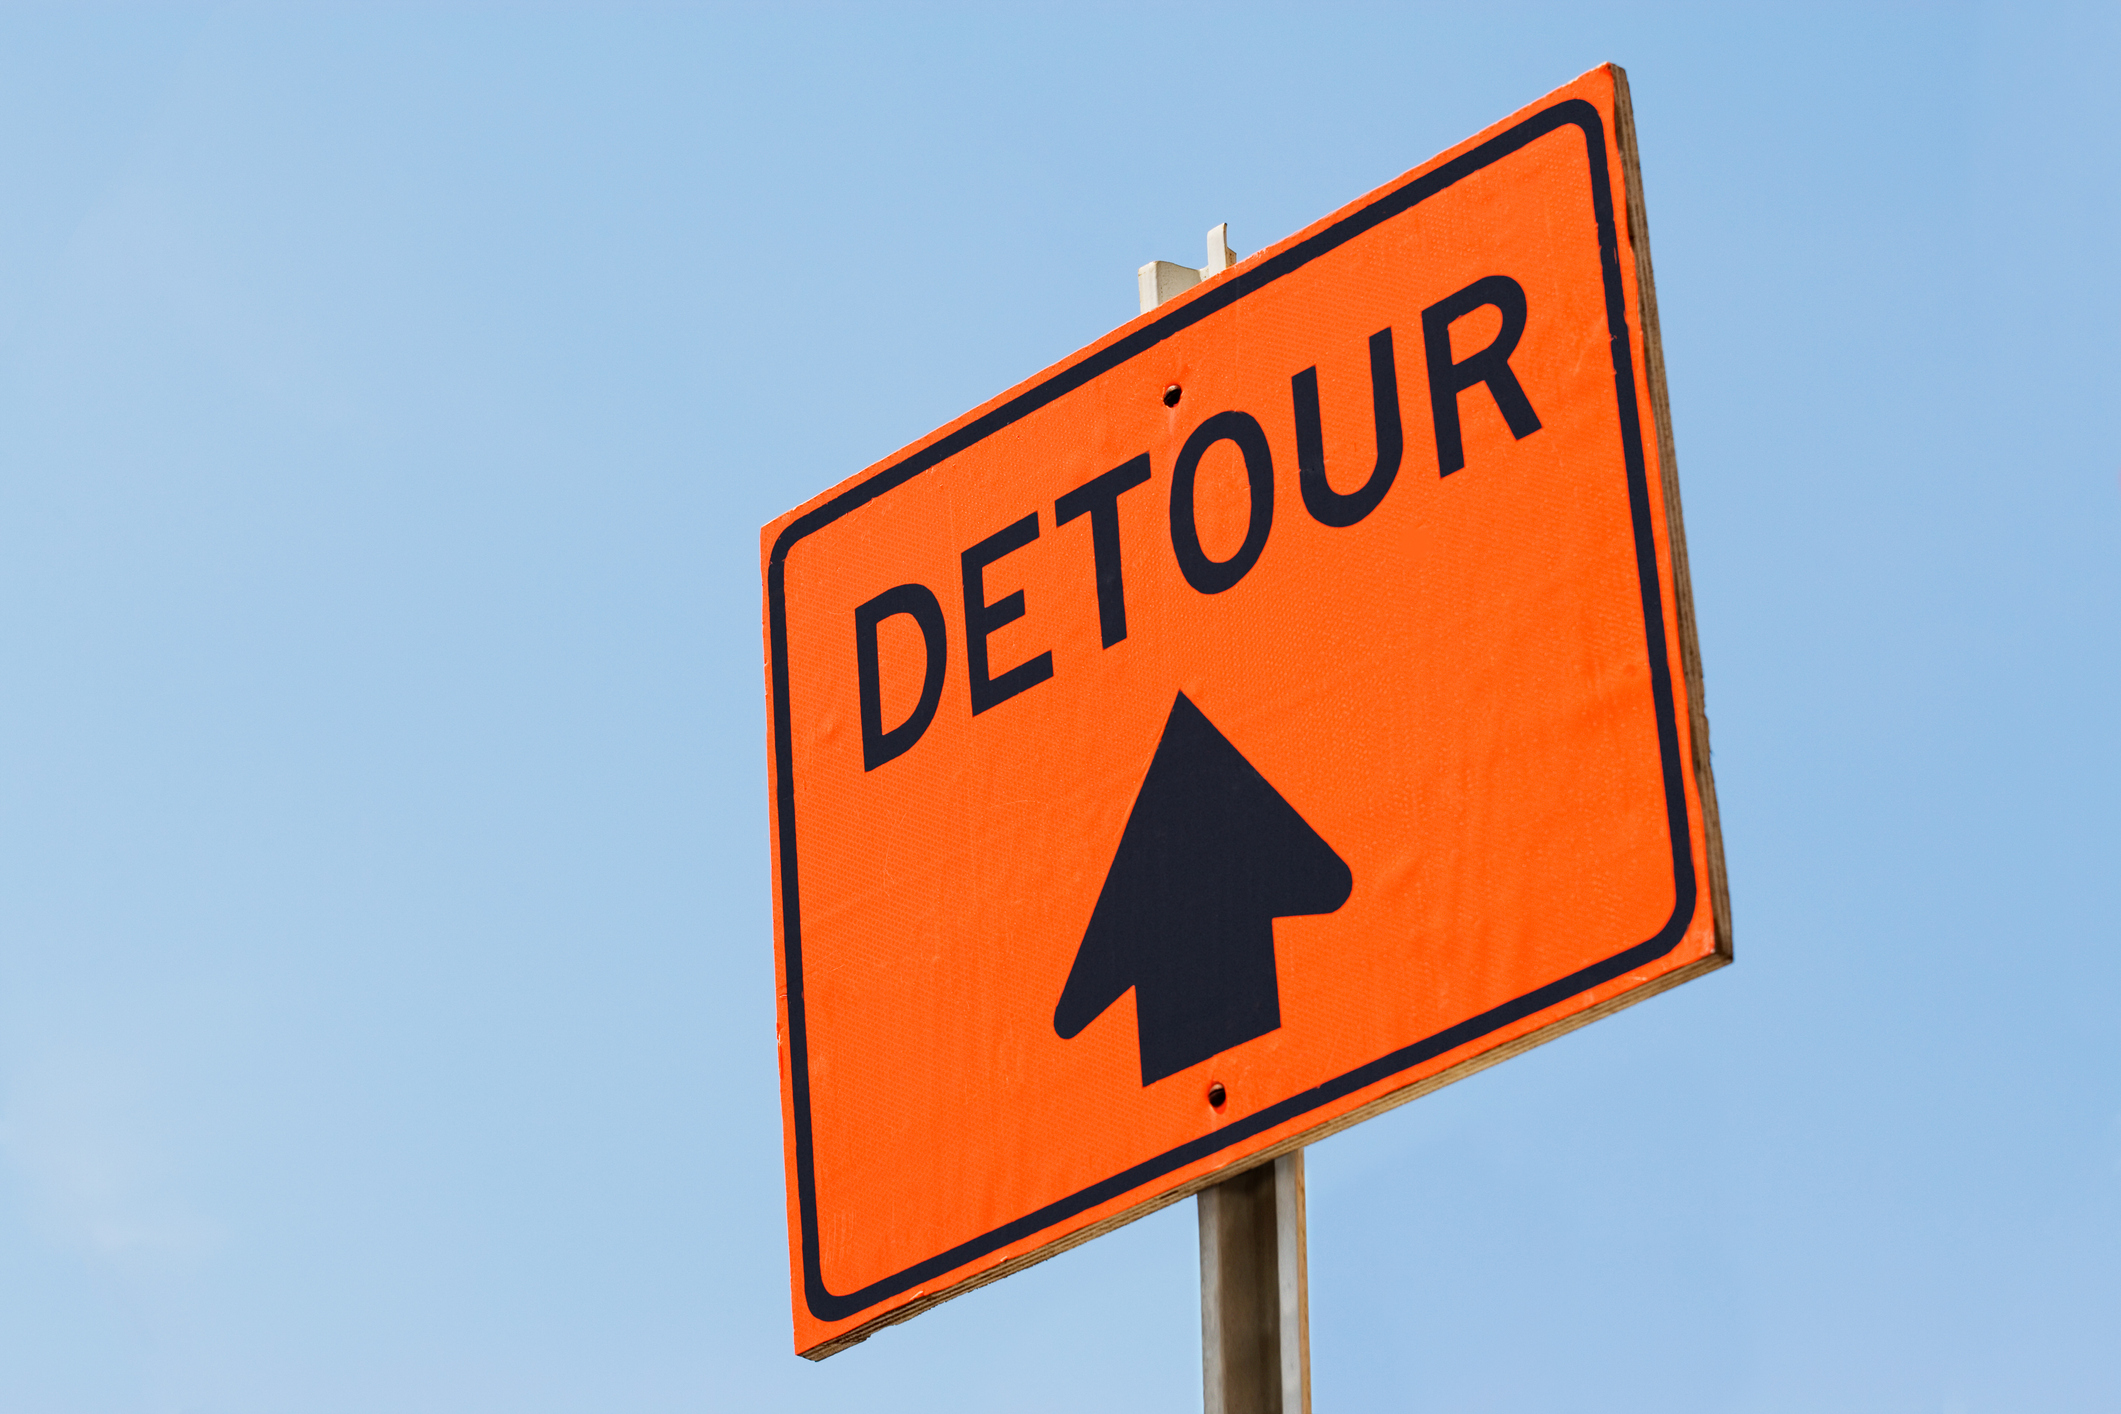 Warman Road ramp to Circle Drive to close for 2 weeks